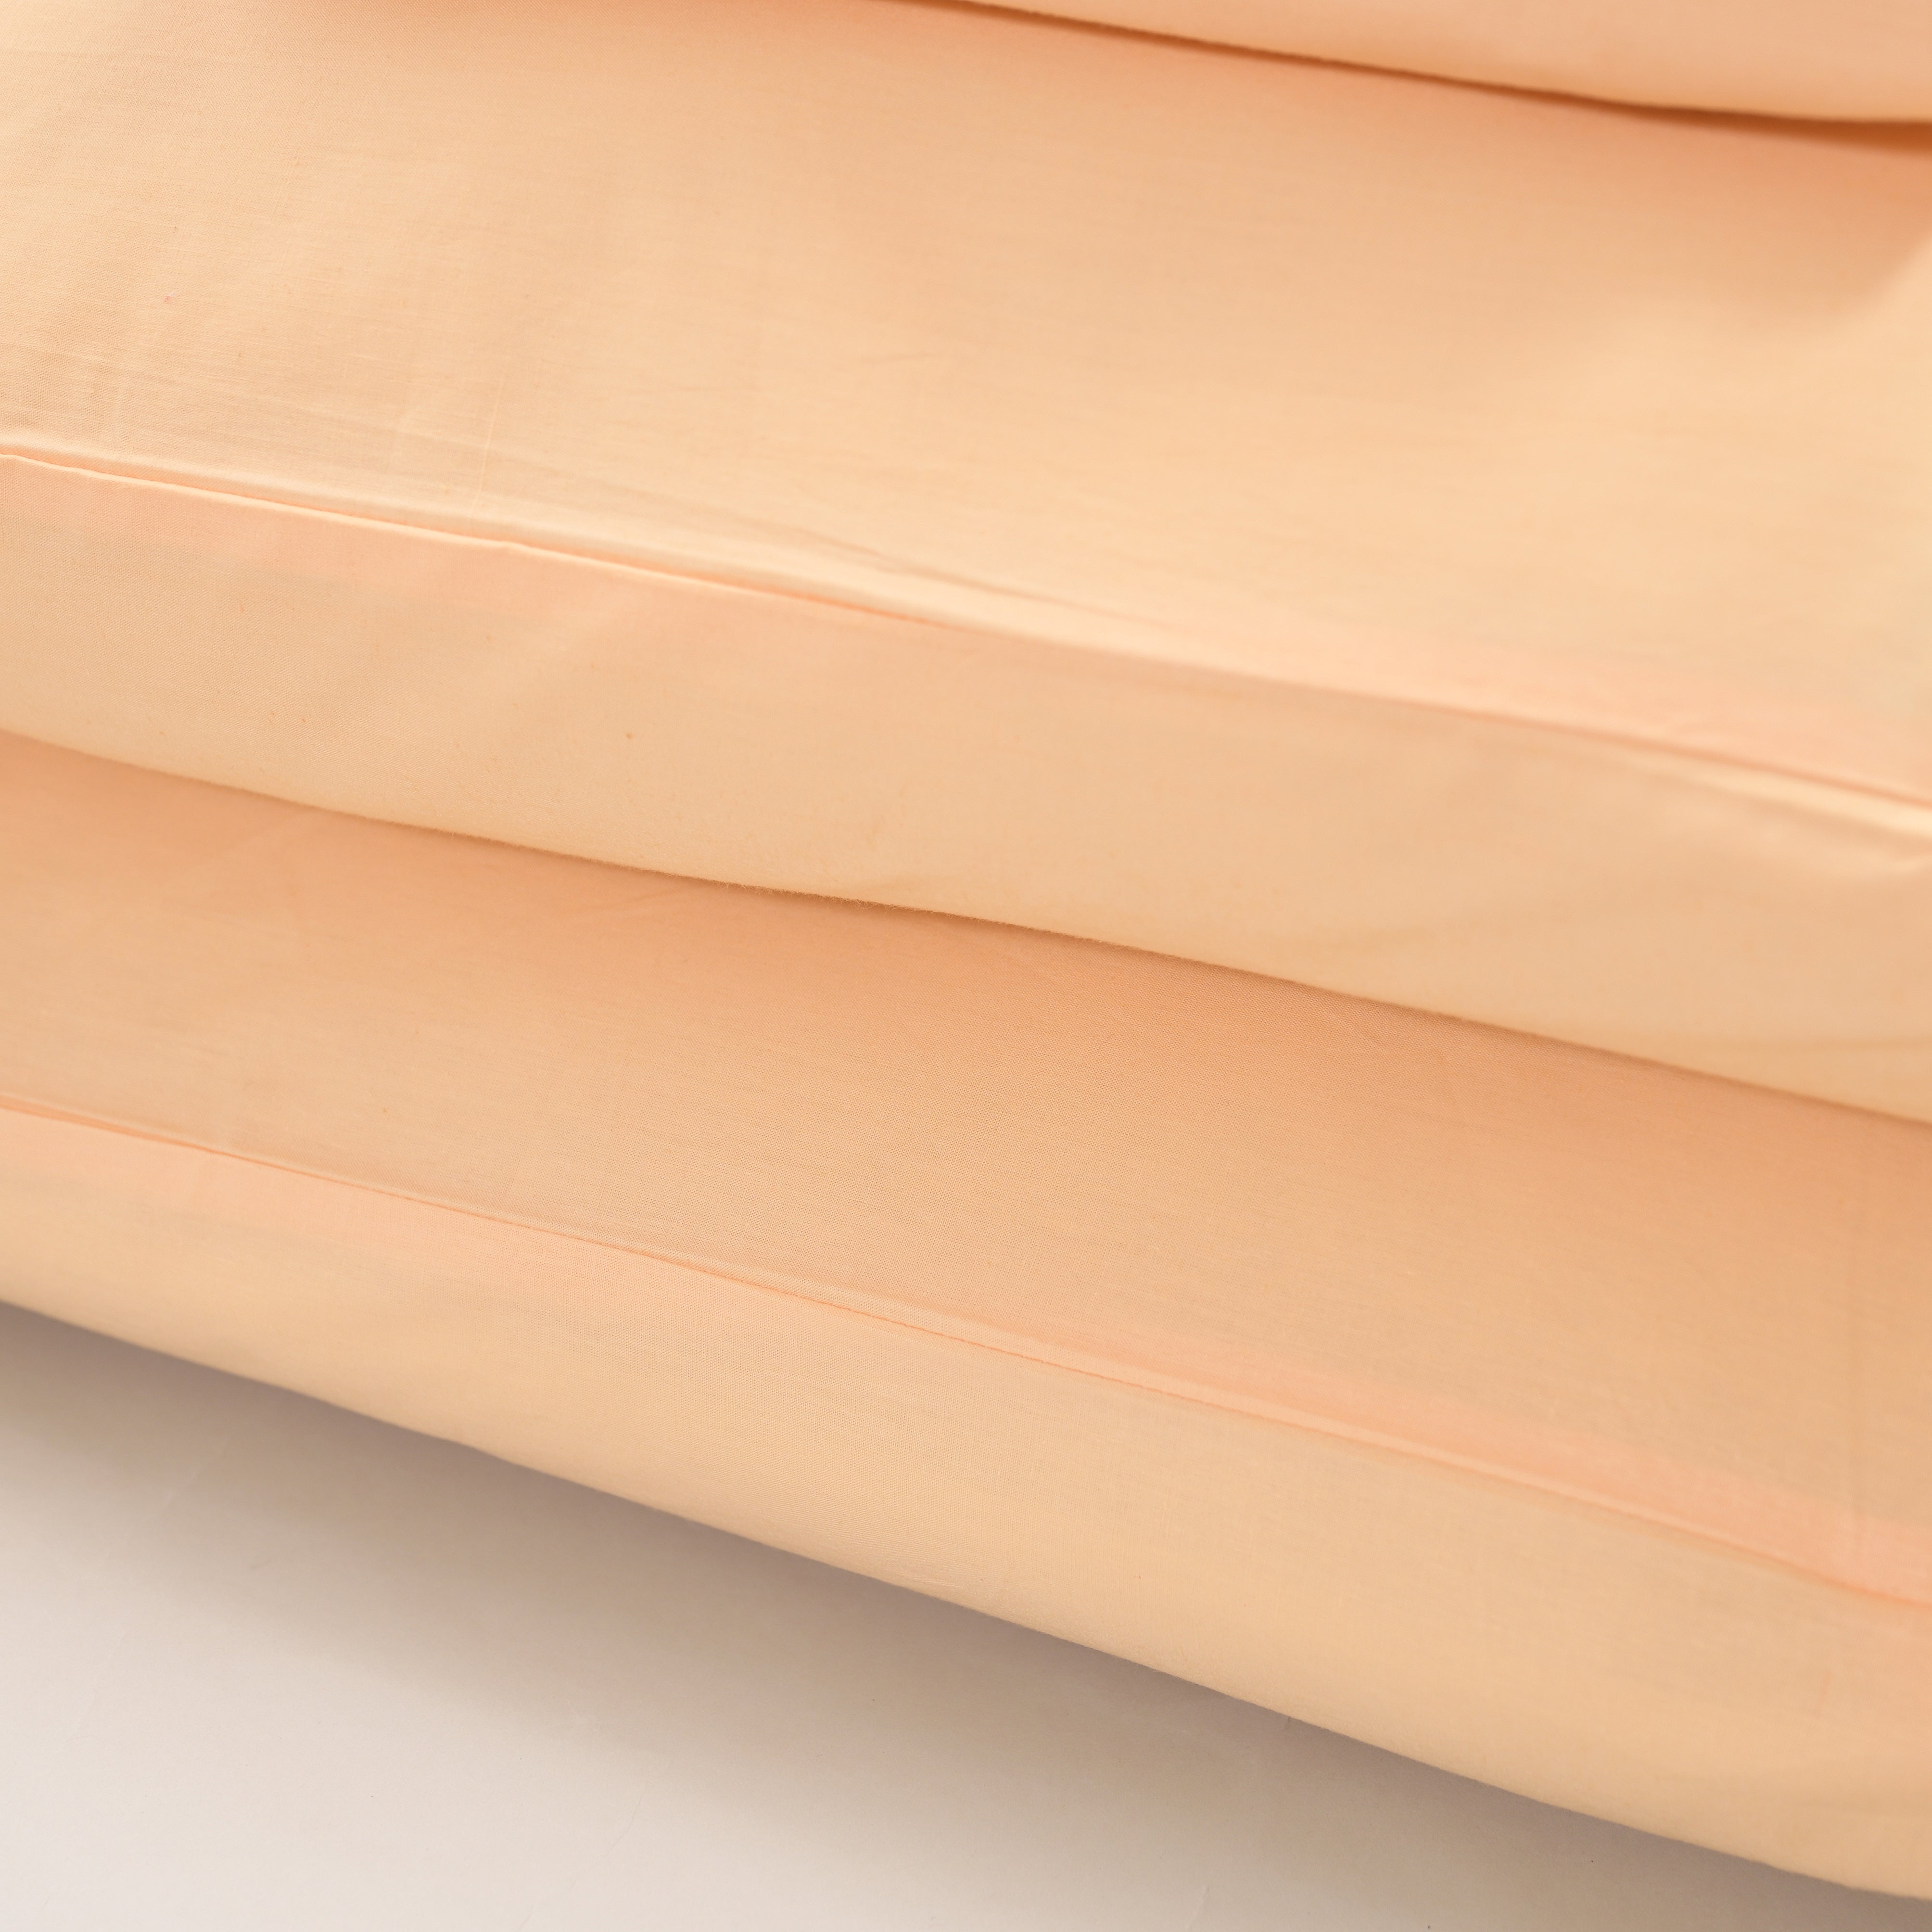 Apricot Solid Bed Sheet